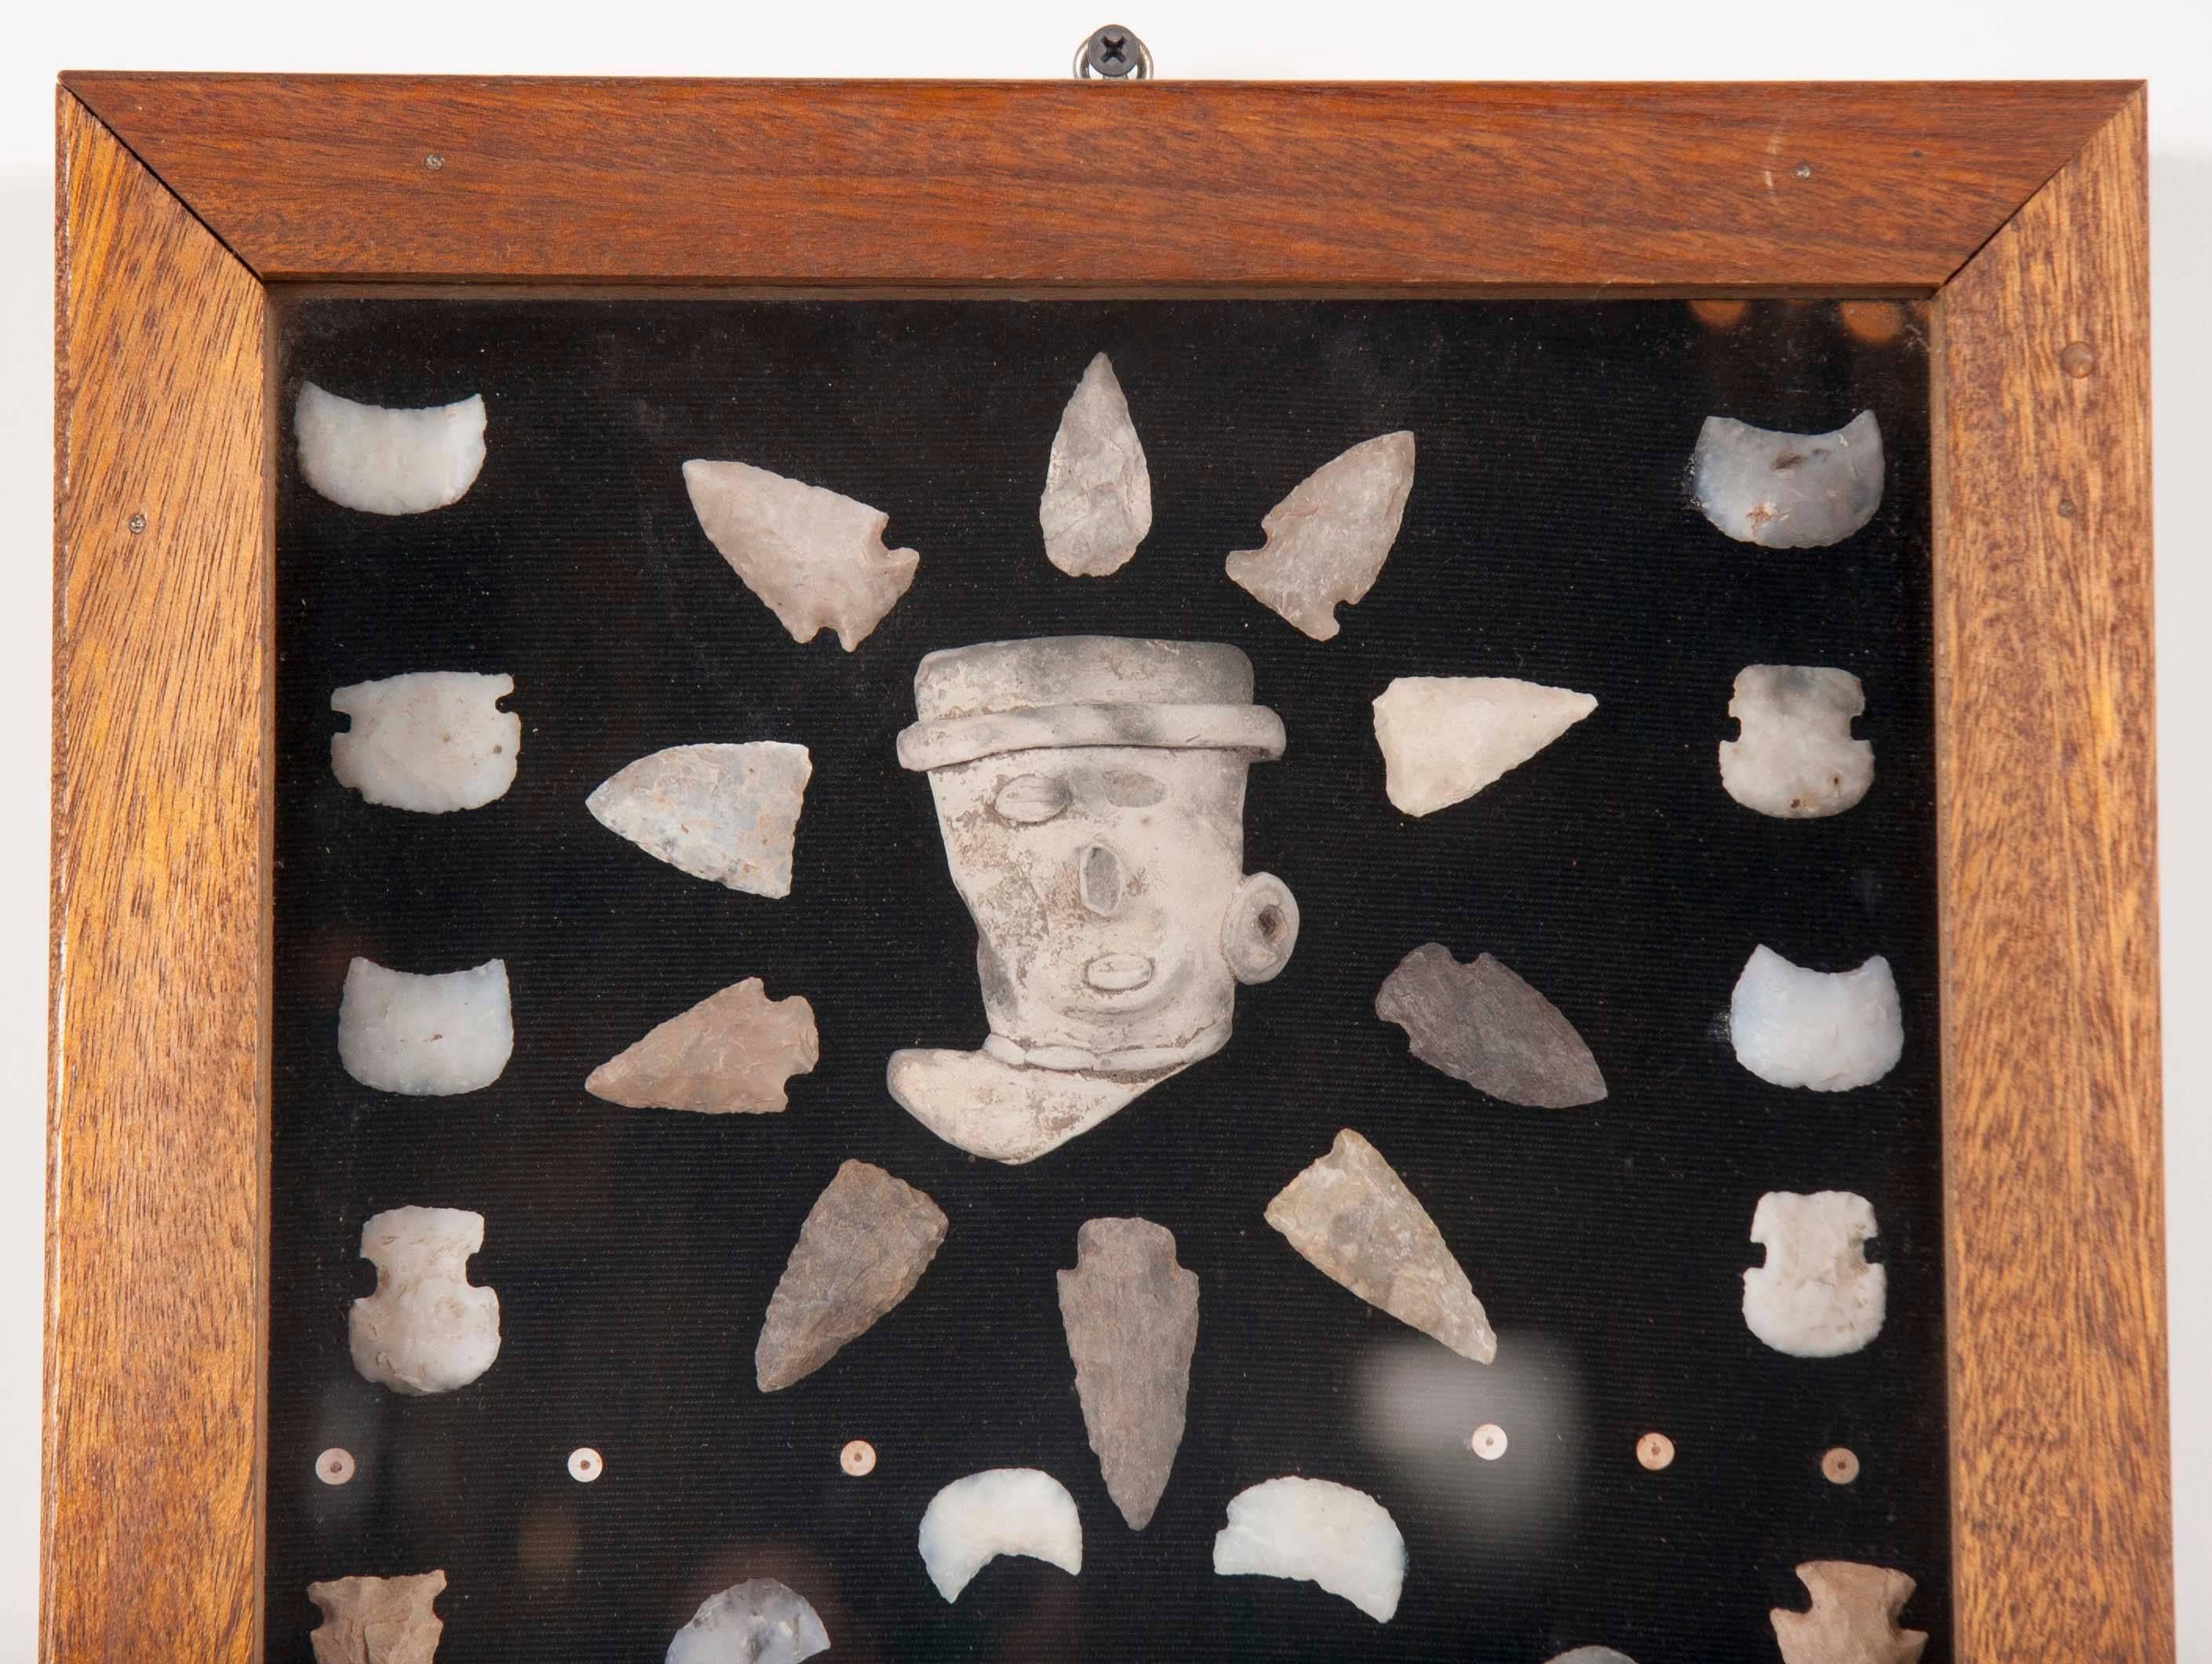 18th Century and Earlier American Indian Arrowhead and Artifact Collection